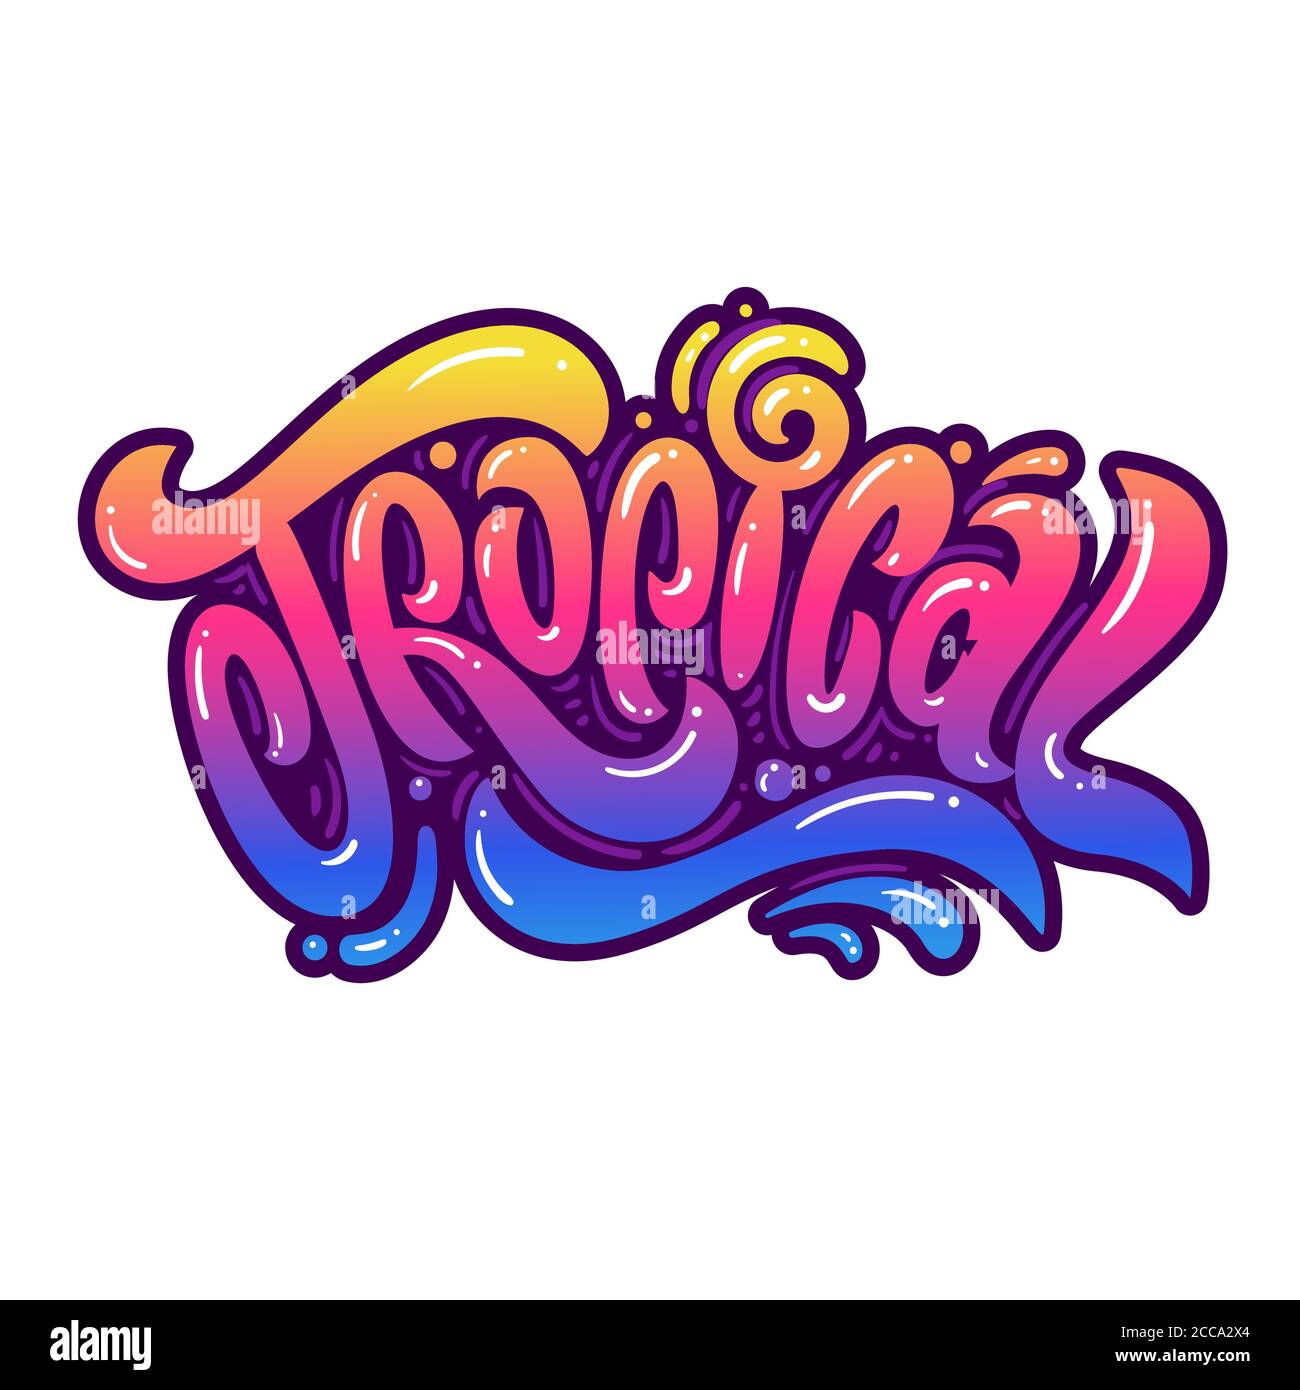 Tropical. Hand lettering colorful text. Design template for greeting cards, invitations, banners, gifts, prints and posters. Stock Vector